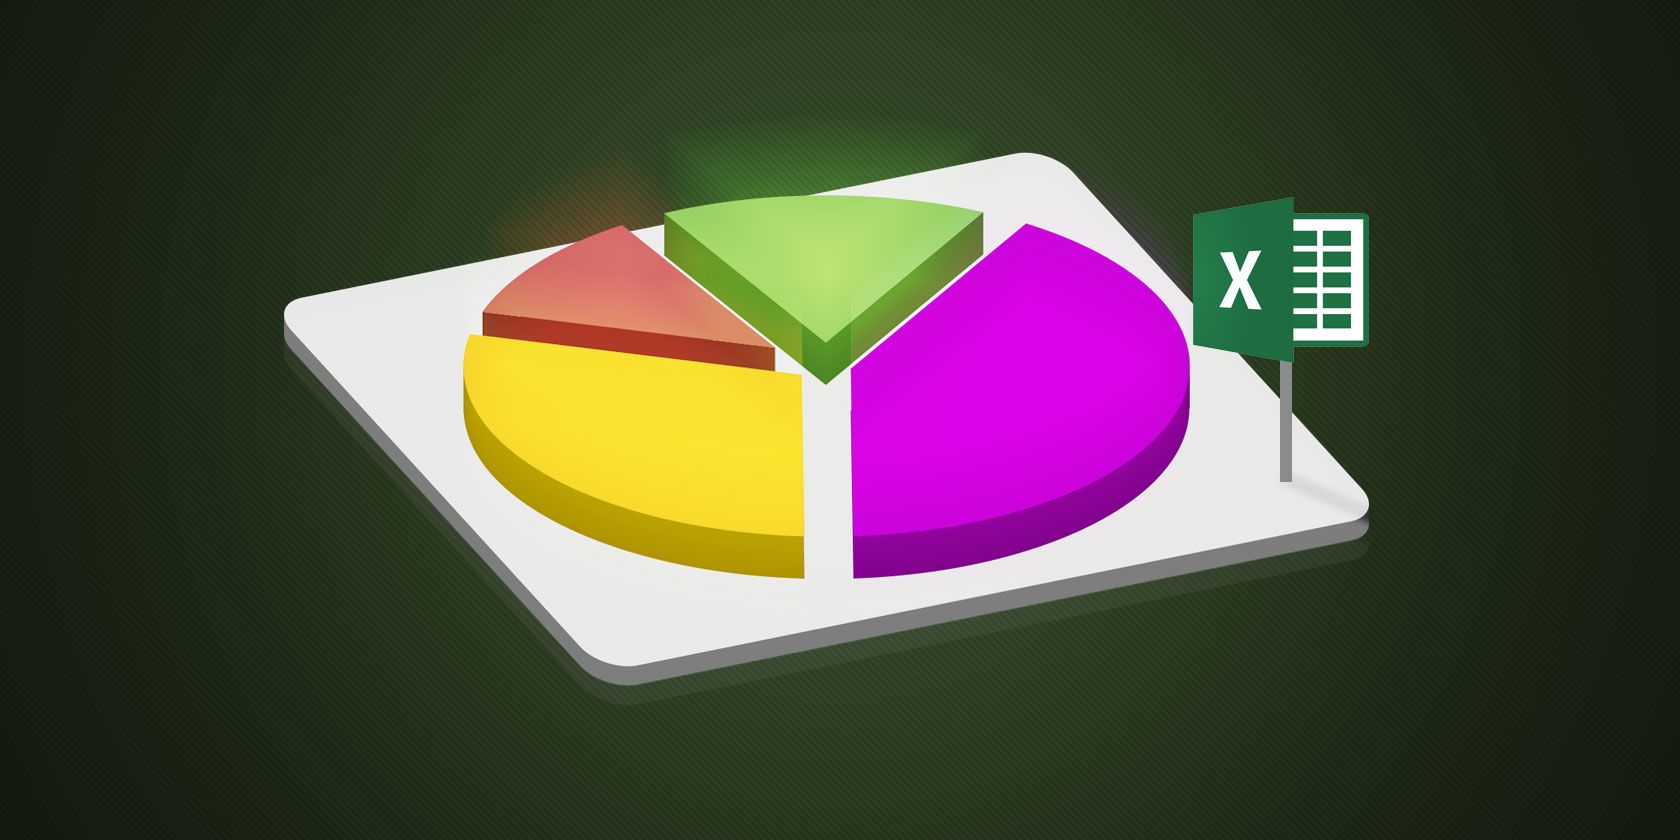 how to make a pie chart in excel with data